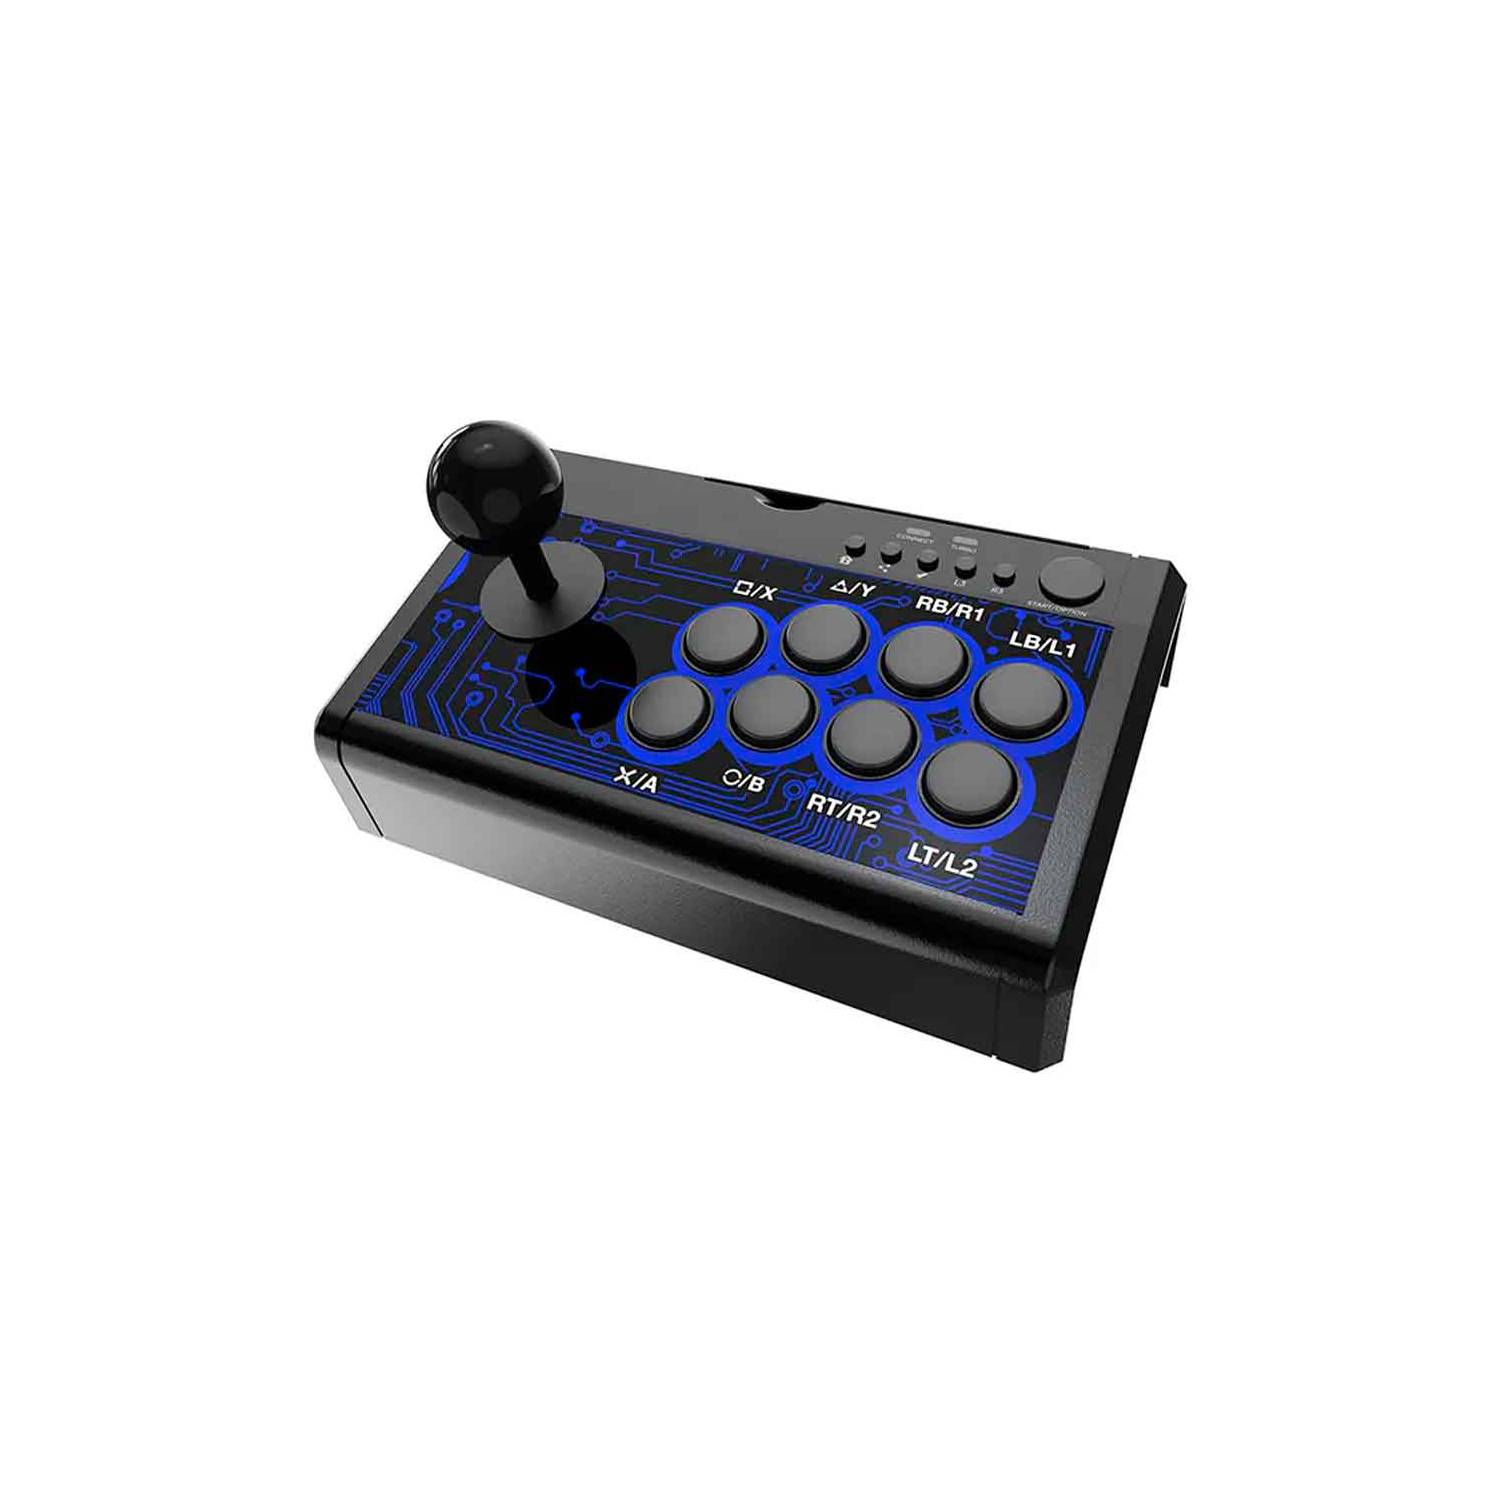 Arcade Joystick 7 en 1 para PS4 Switch Xbox One 360 PC Android PS3 I  Oechsle - Oechsle